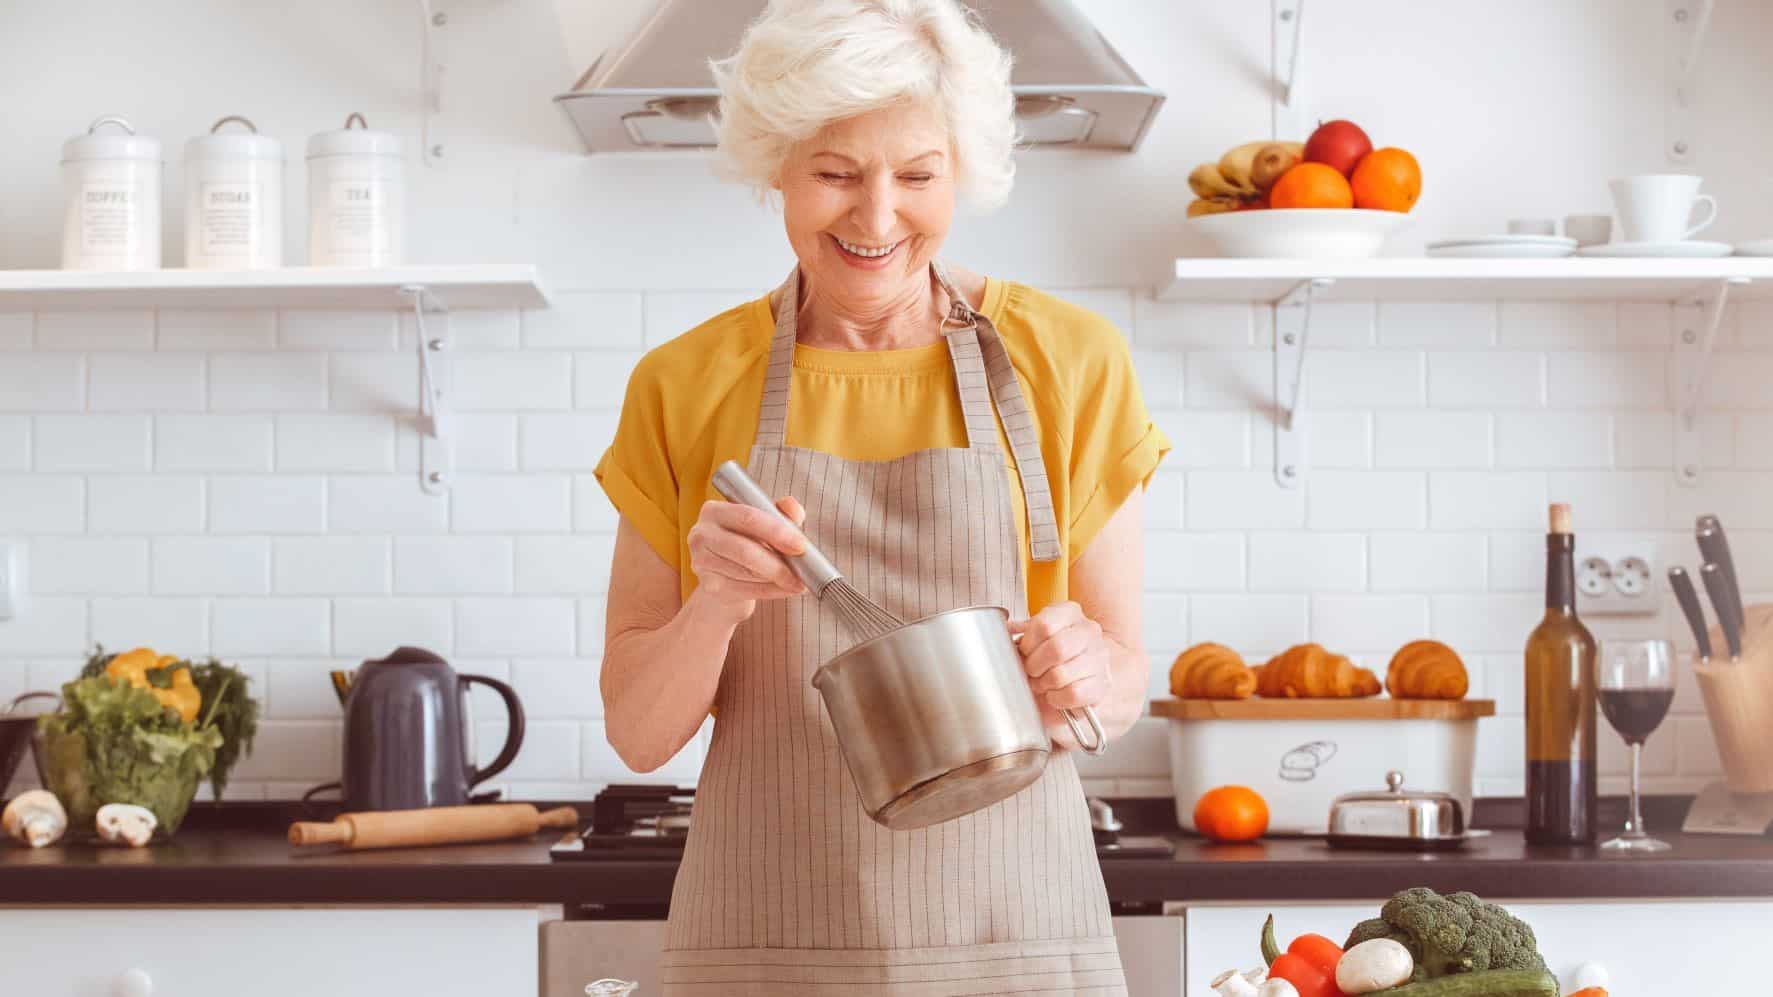 Middle-aged woman cooking in her kitchen. She is stirring a pot.